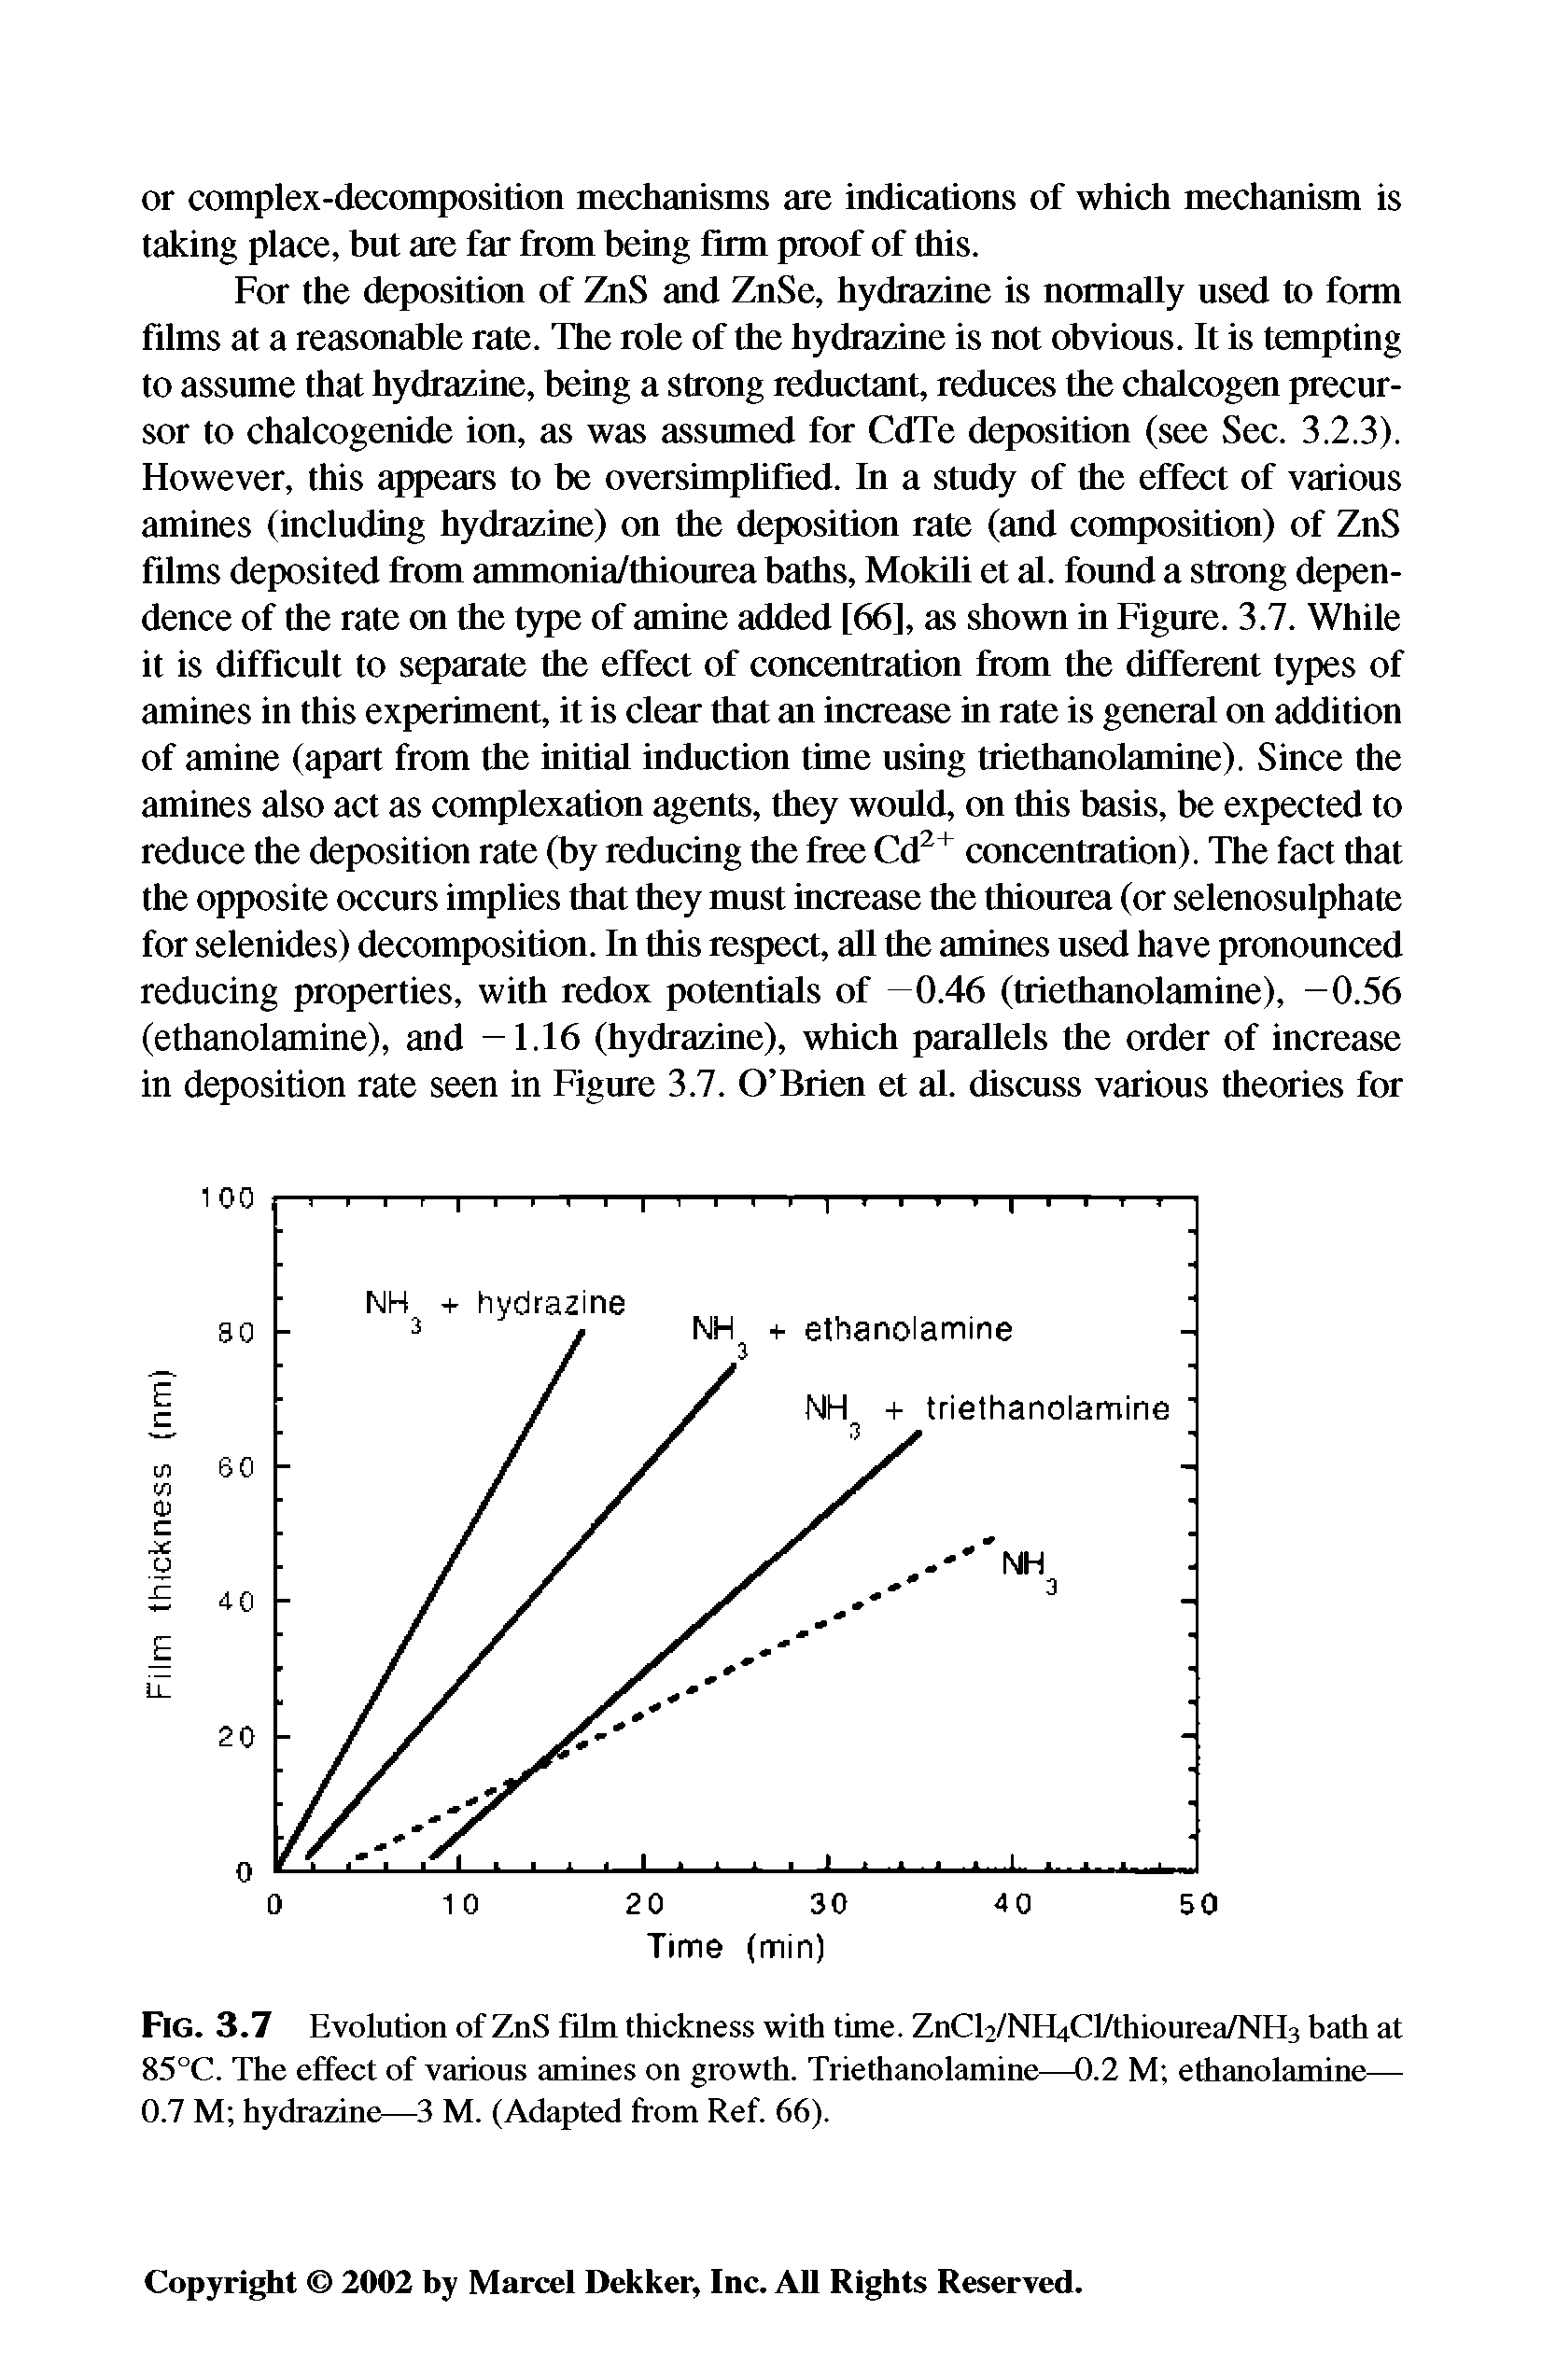 Fig. 3.7 Evolution of ZnS fihn thickness with time. ZnCF/NEfiCl/thiourea/NHs bath at 85°C. The effect of various amines on growth. Triethanolamine—0.2 M ethanolamine— 0.7 M hydrazine—3 M. (Adapted from Ref. 66).